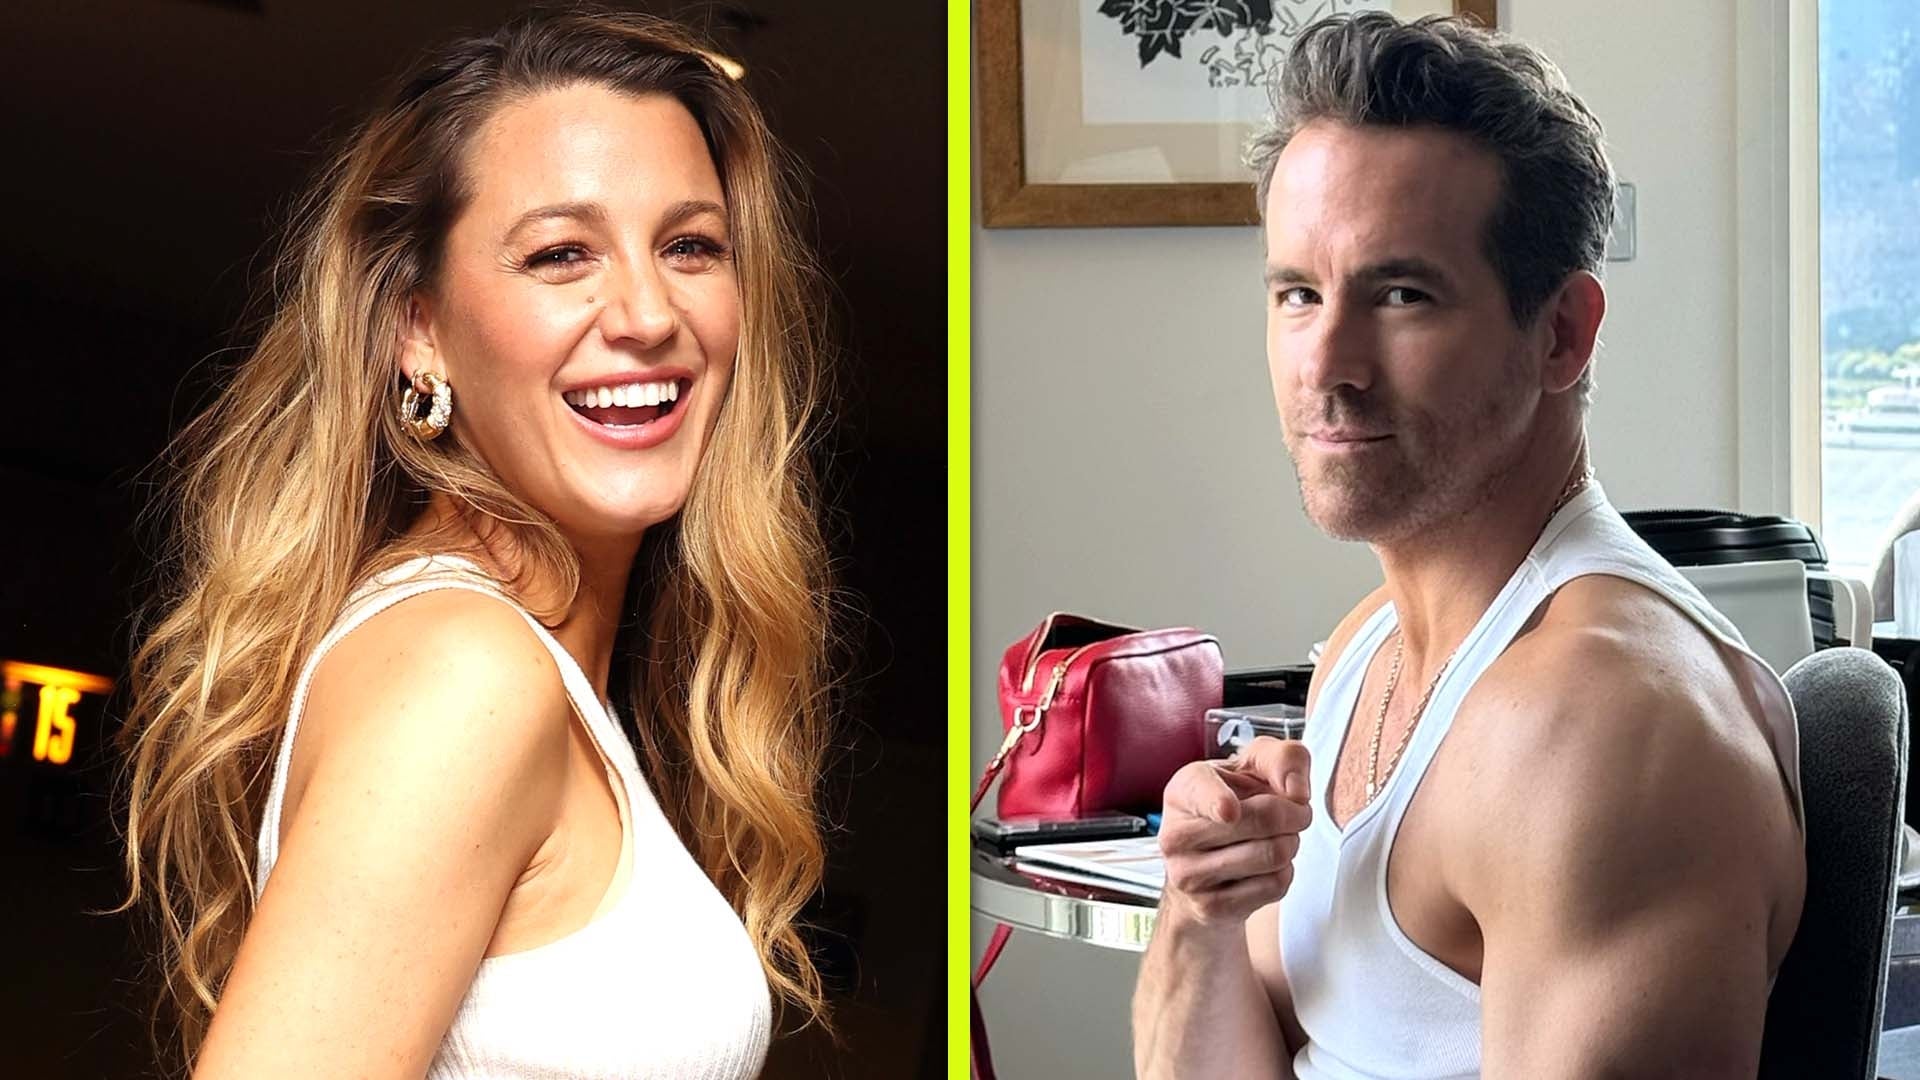 Blake Lively Leaves Ryan Reynolds a Steamy Comment on 'Thirst Trap'